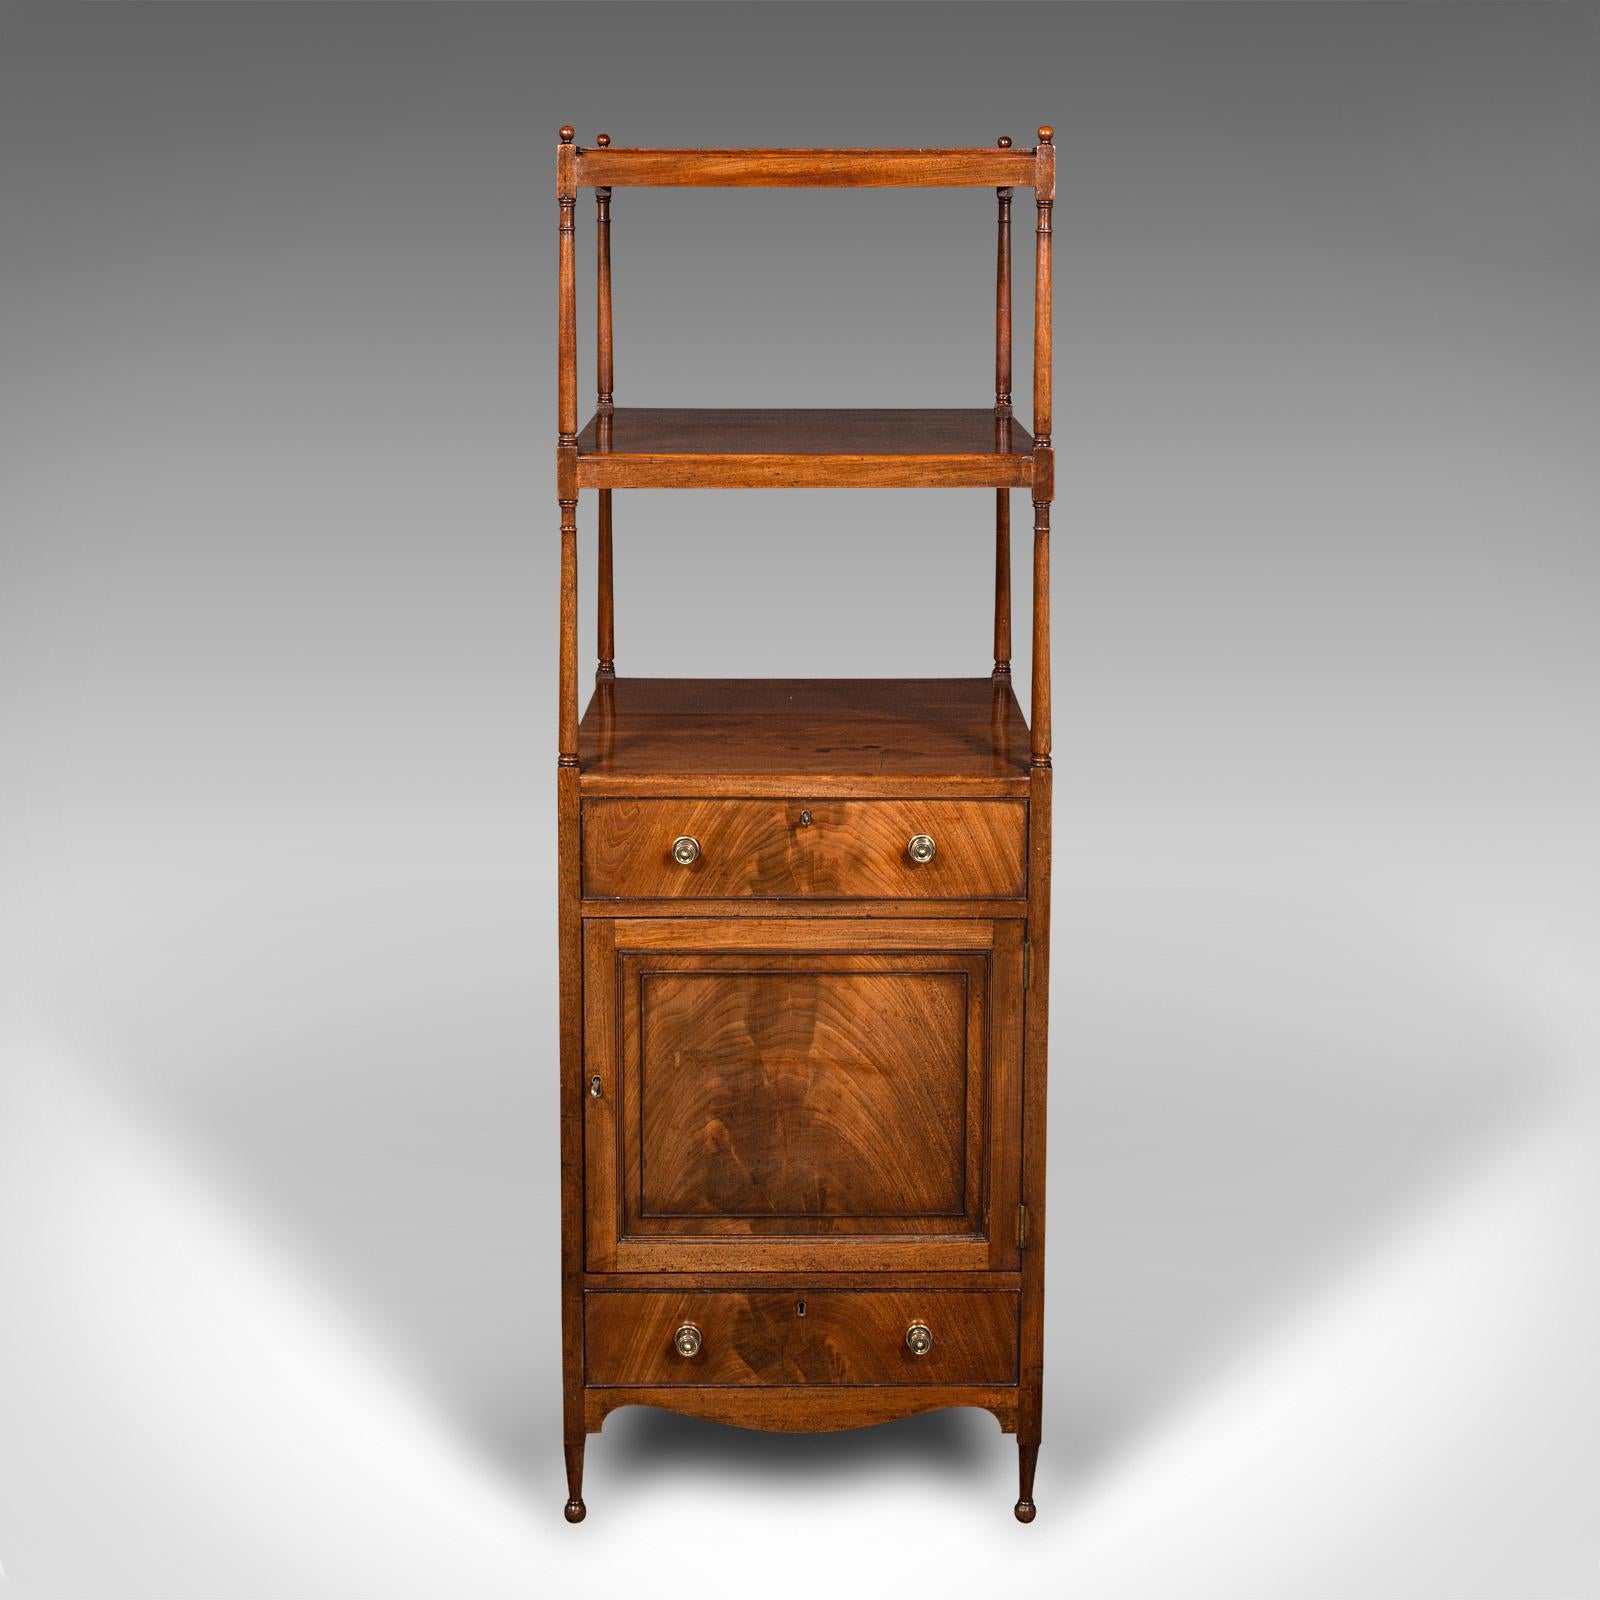 This is an antique two tier display stand. An English, mahogany whatnot with cabinet lower, dating to the Victorian period, circa 1860.

Beautifully presented stand with a suite of useful storage
Displays a desirable aged patina and in good